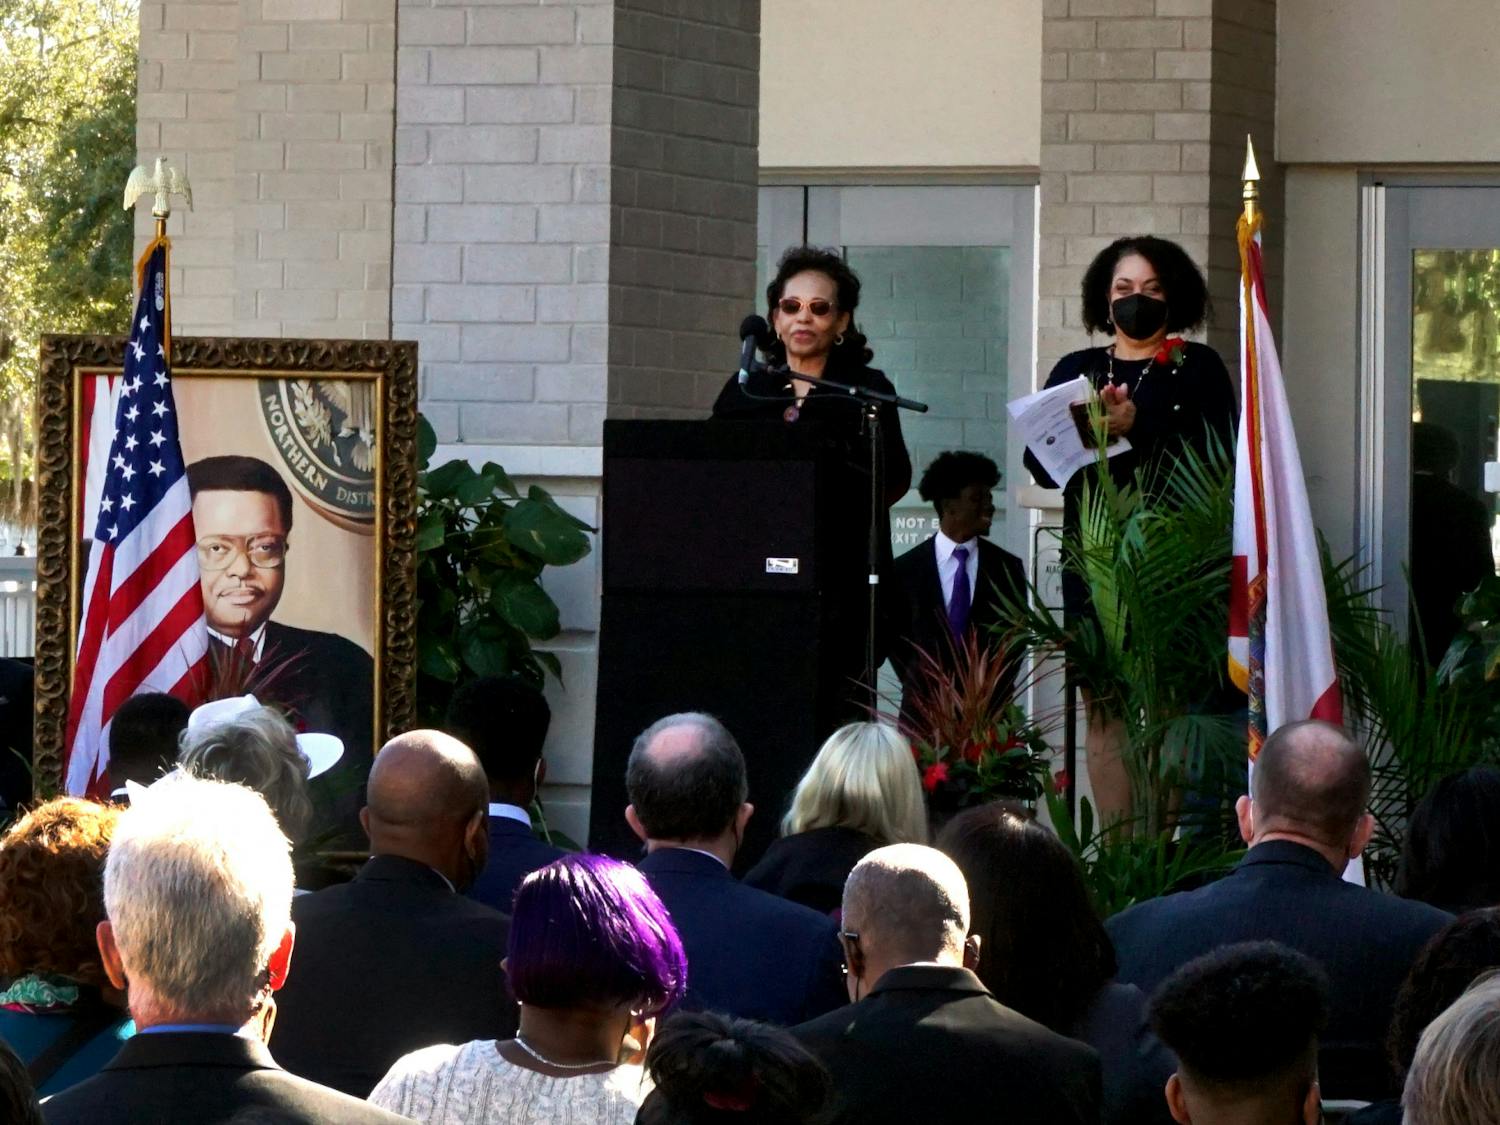 Judge Stephan Mickle's wife, Evelyn Mickle, speaks at the podium about her husband's trailblazing legacy at the renaming ceremony of the Alachua County Courthouse on Friday, Jan. 14. The courthouse is located at 220 S. Main St. 